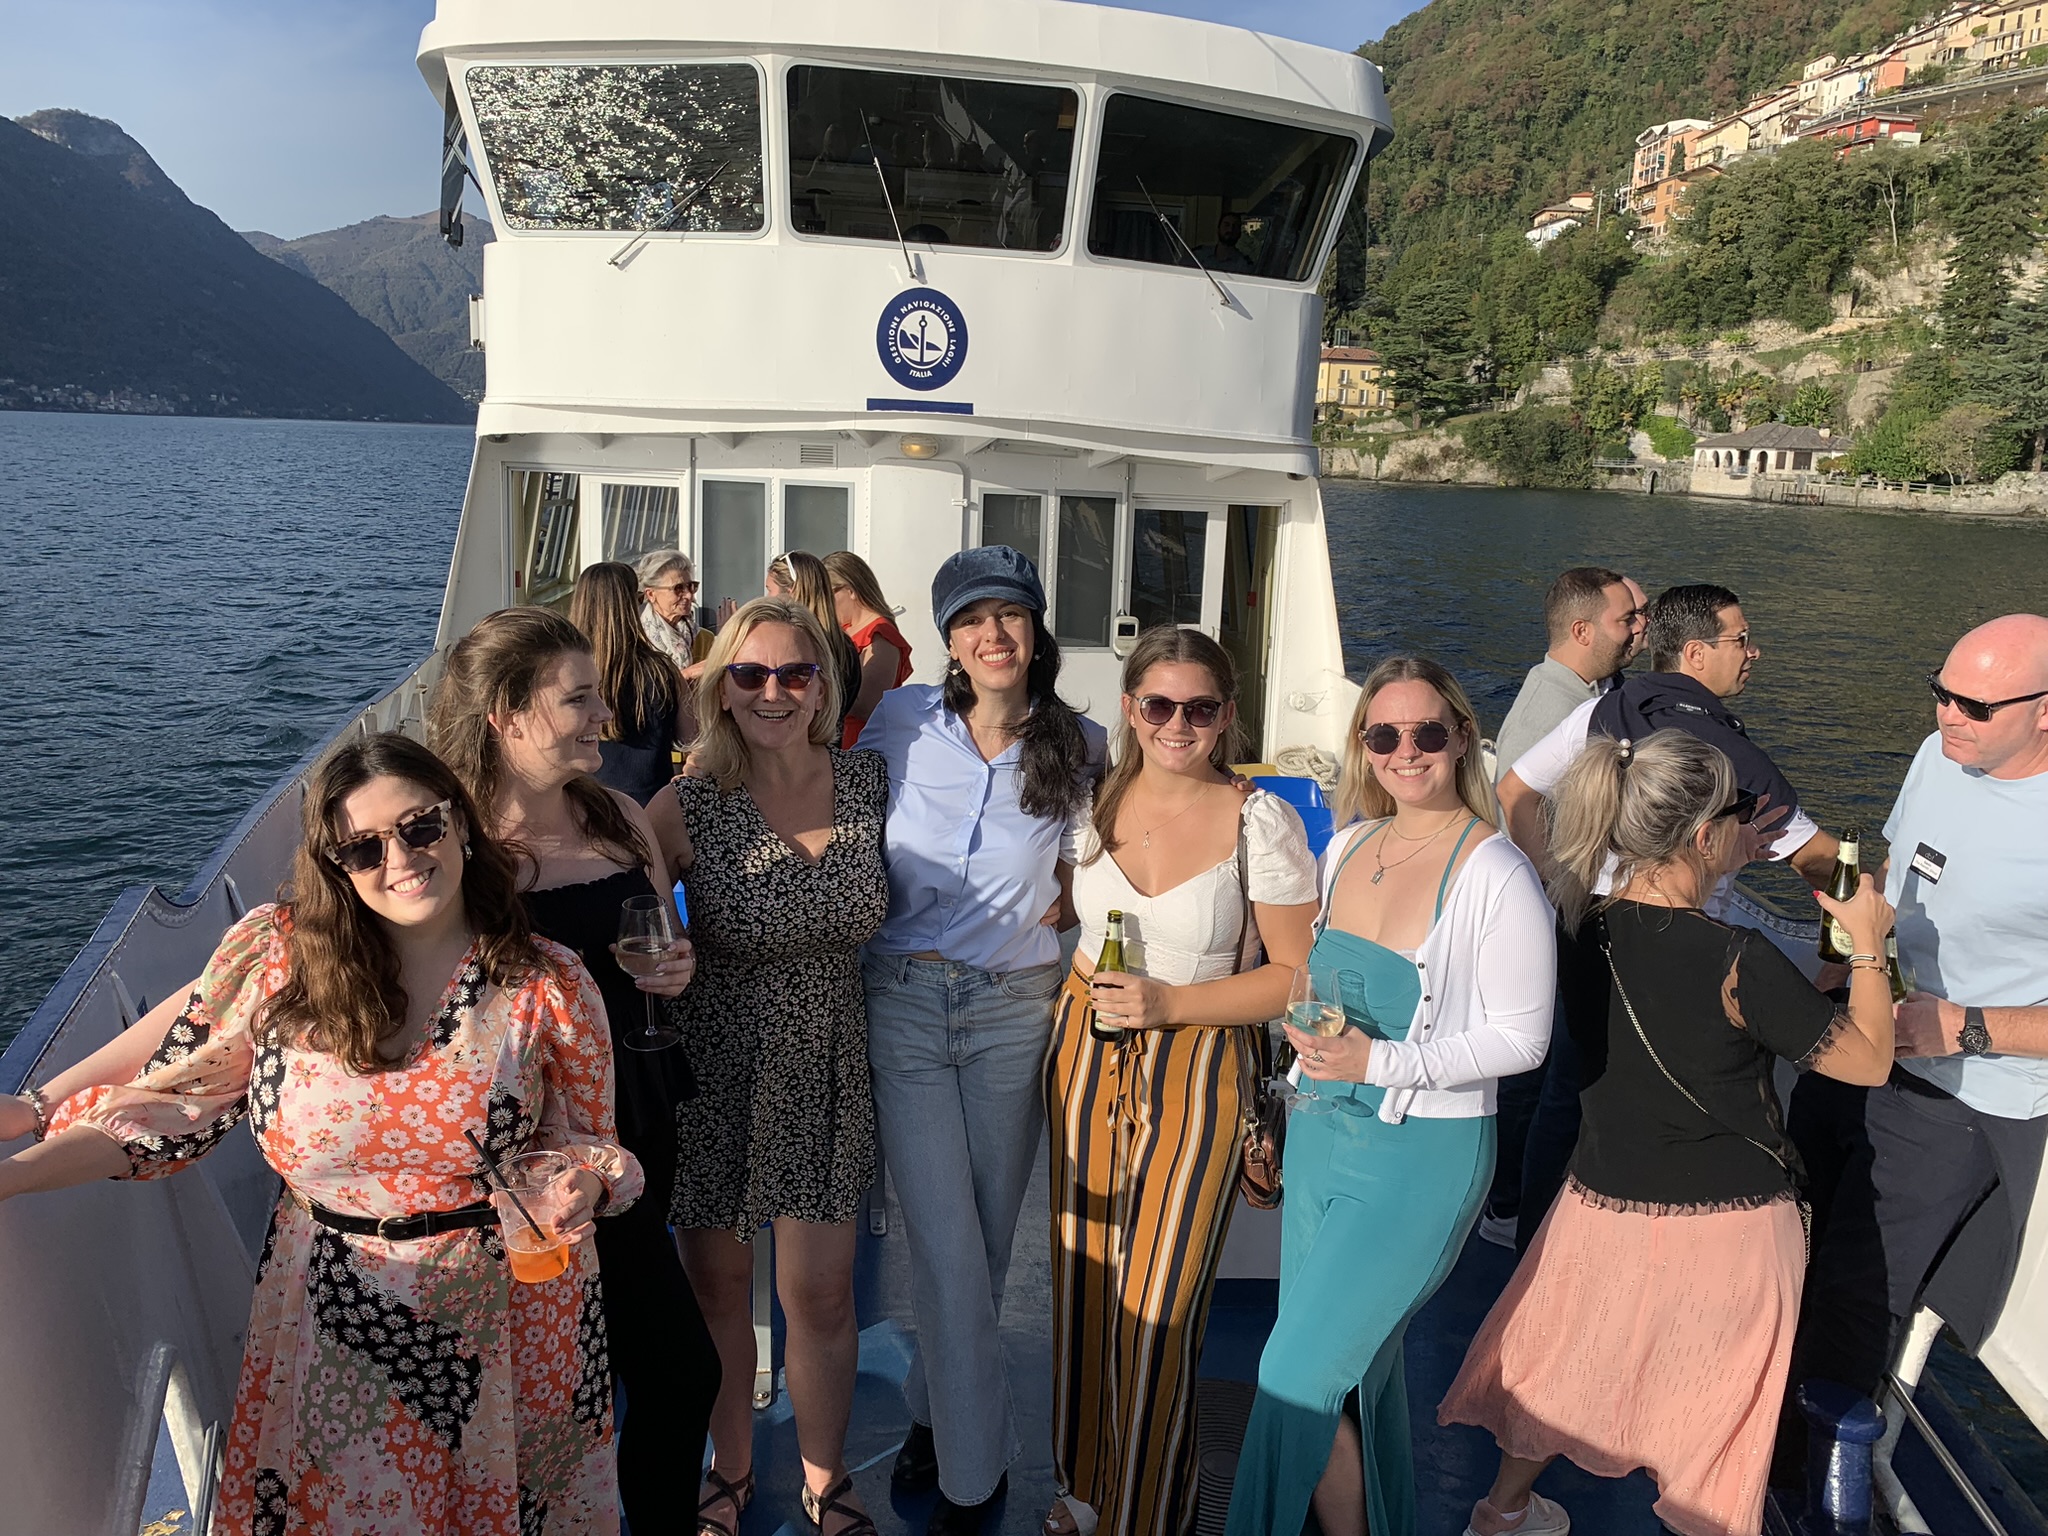 A trip to Italy with DBF Events